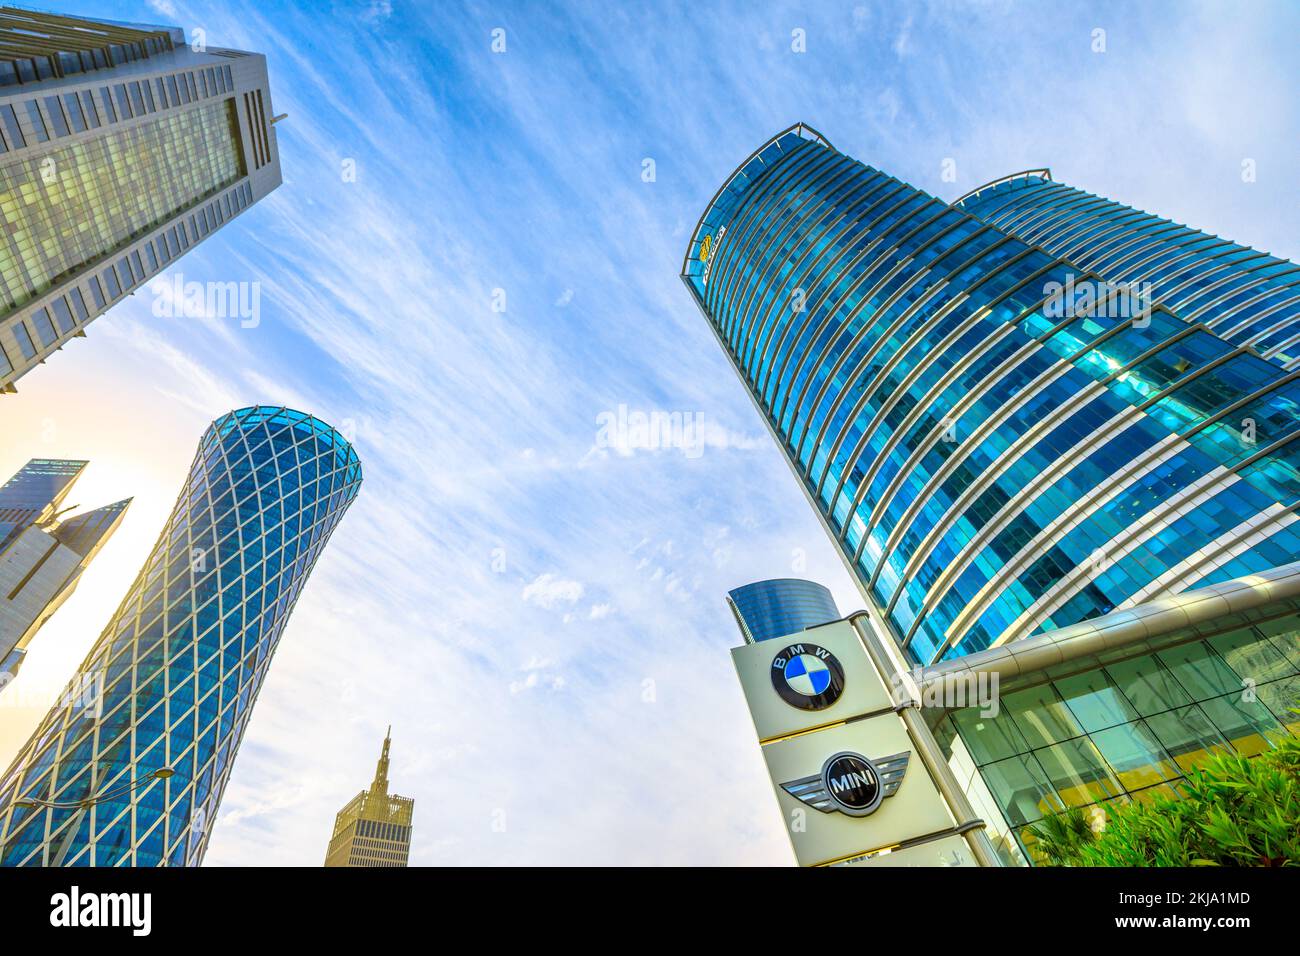 Doha, Qatar - February 17, 2019: perspective view of BMW and Mini logo at Alfardan Towers in the West Bay commercial district. Skyscrapers in Doha Stock Photo